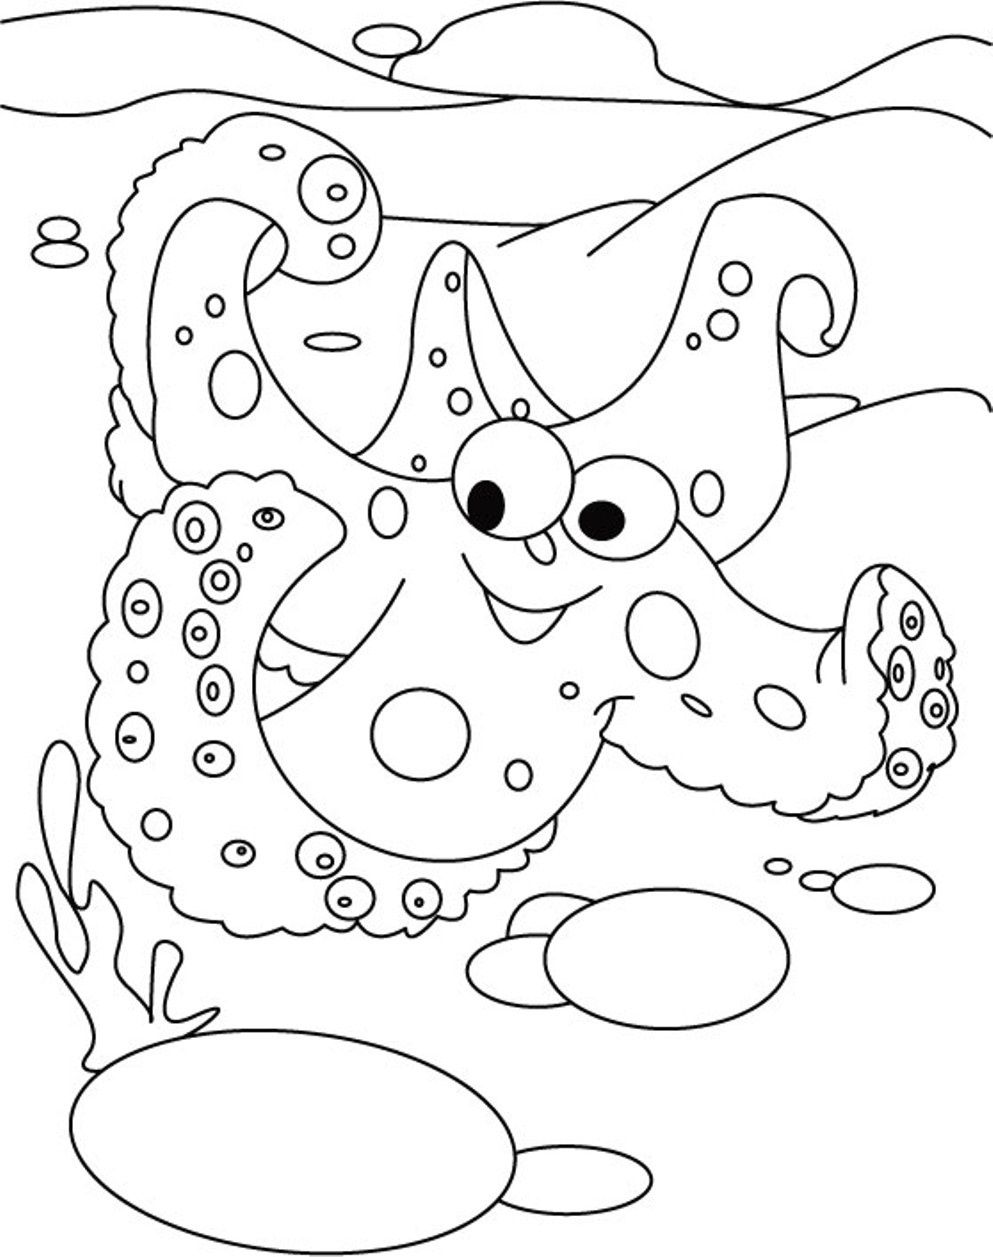 Free Pictures for: Starfish coloring page 